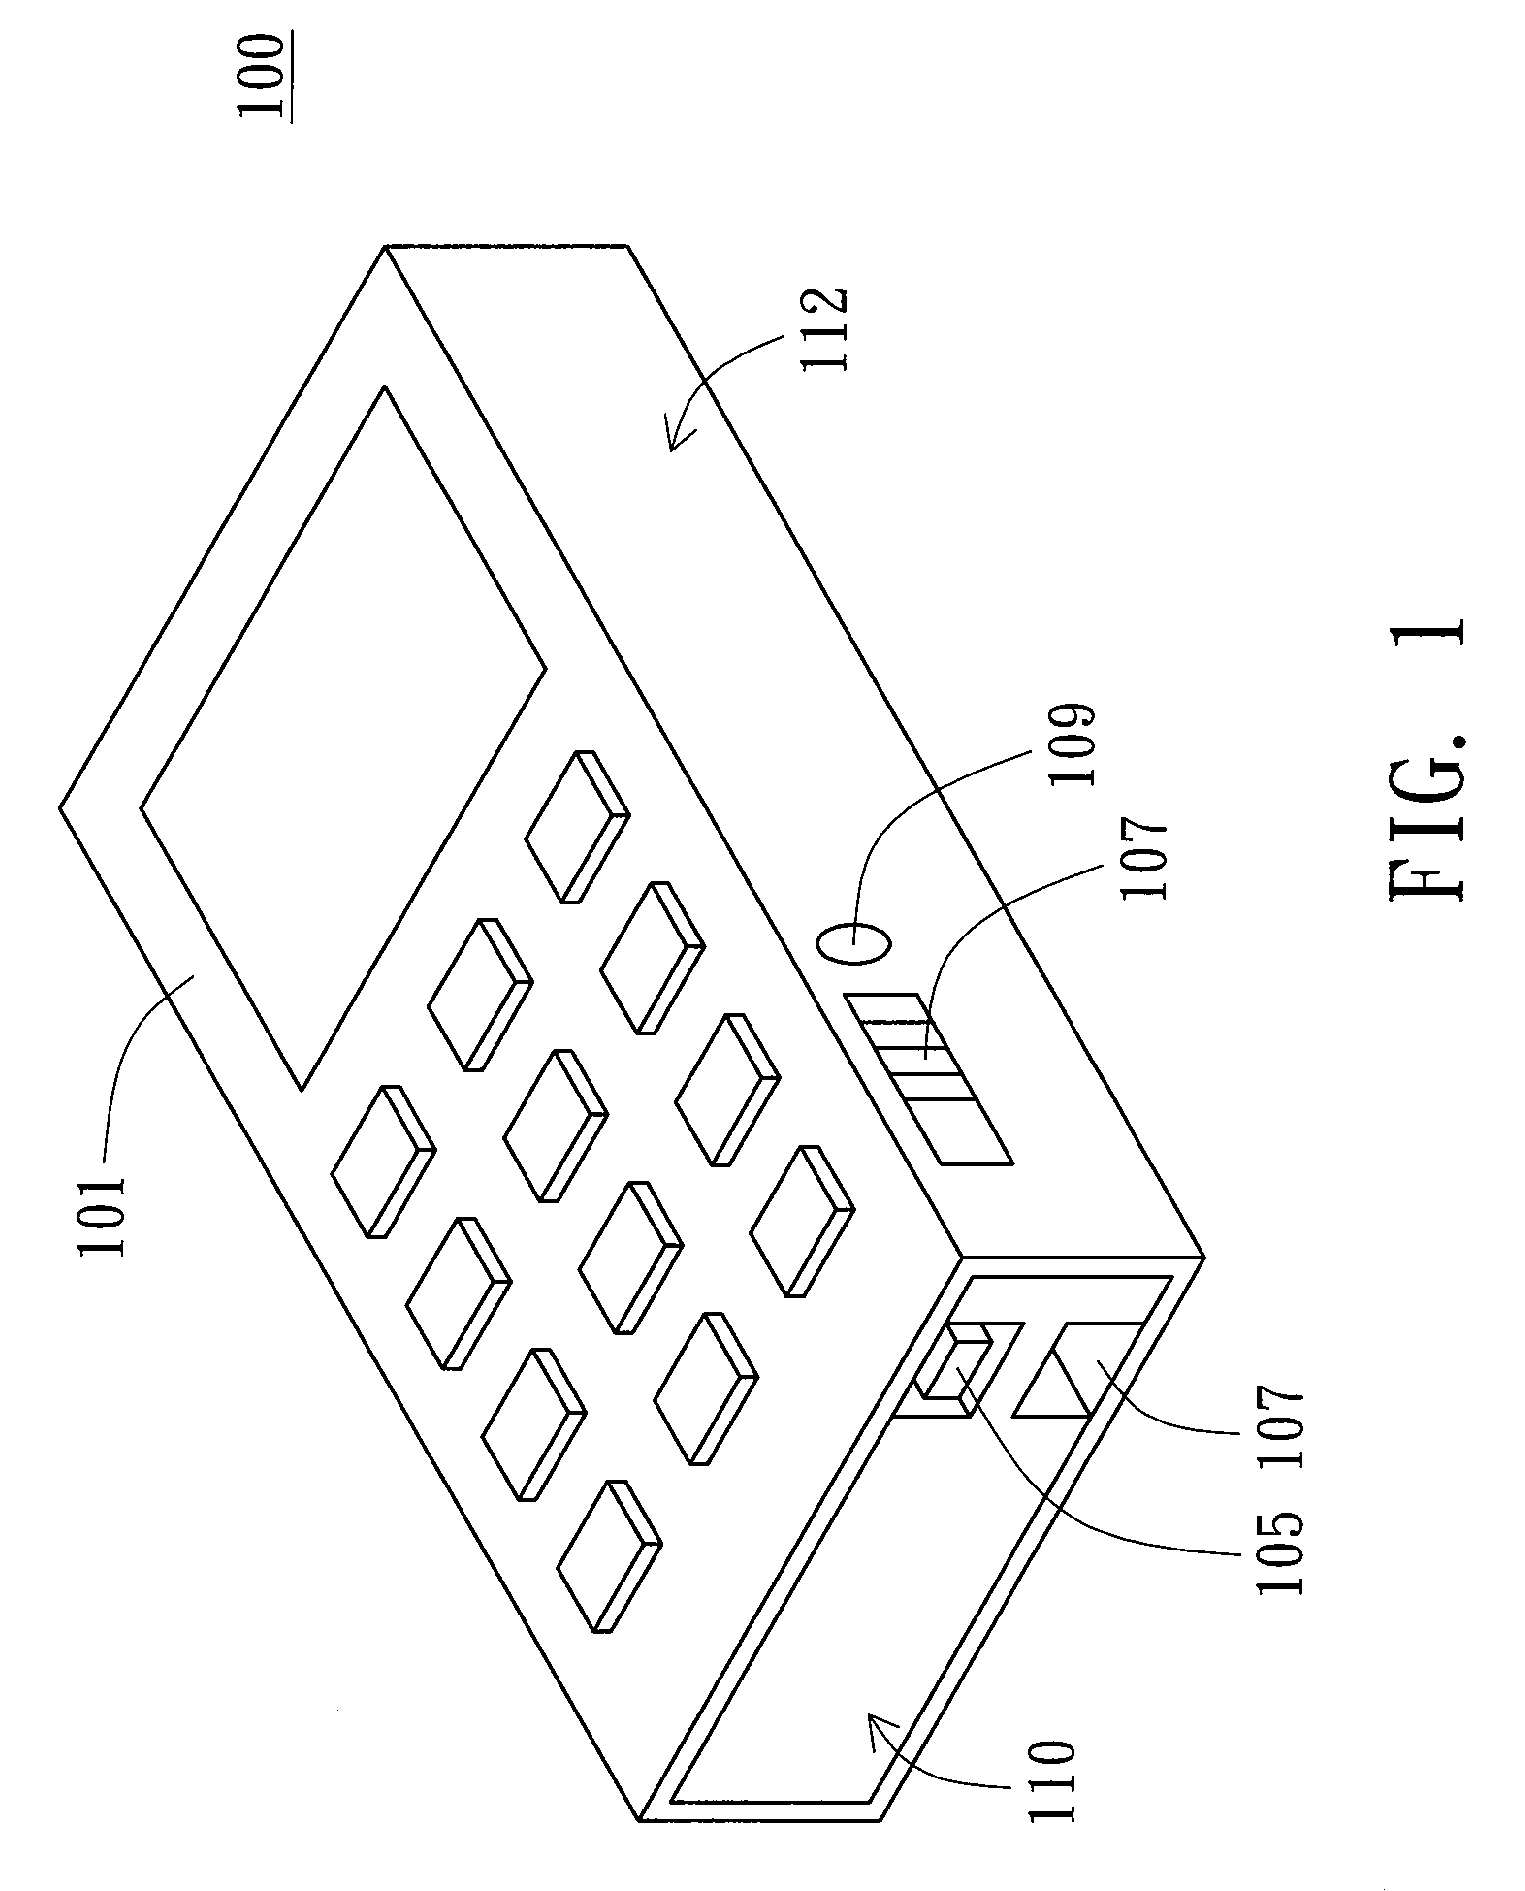 Handheld electronic apparatus capable of connecting to other electronic device